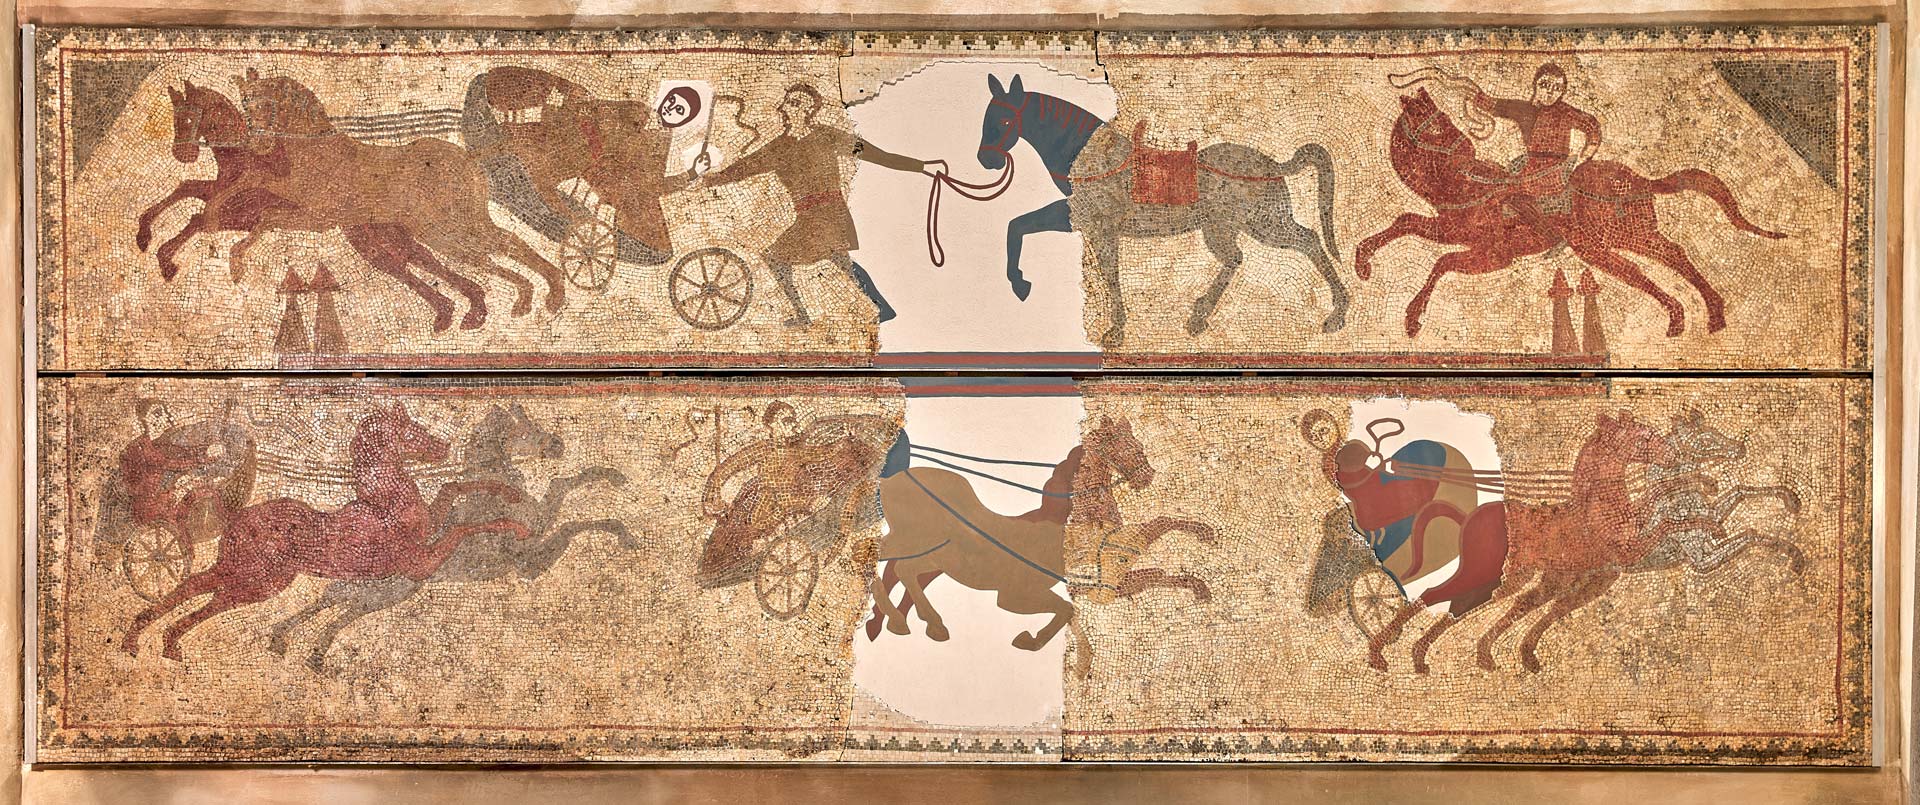 Roman mosaic of a chariot race